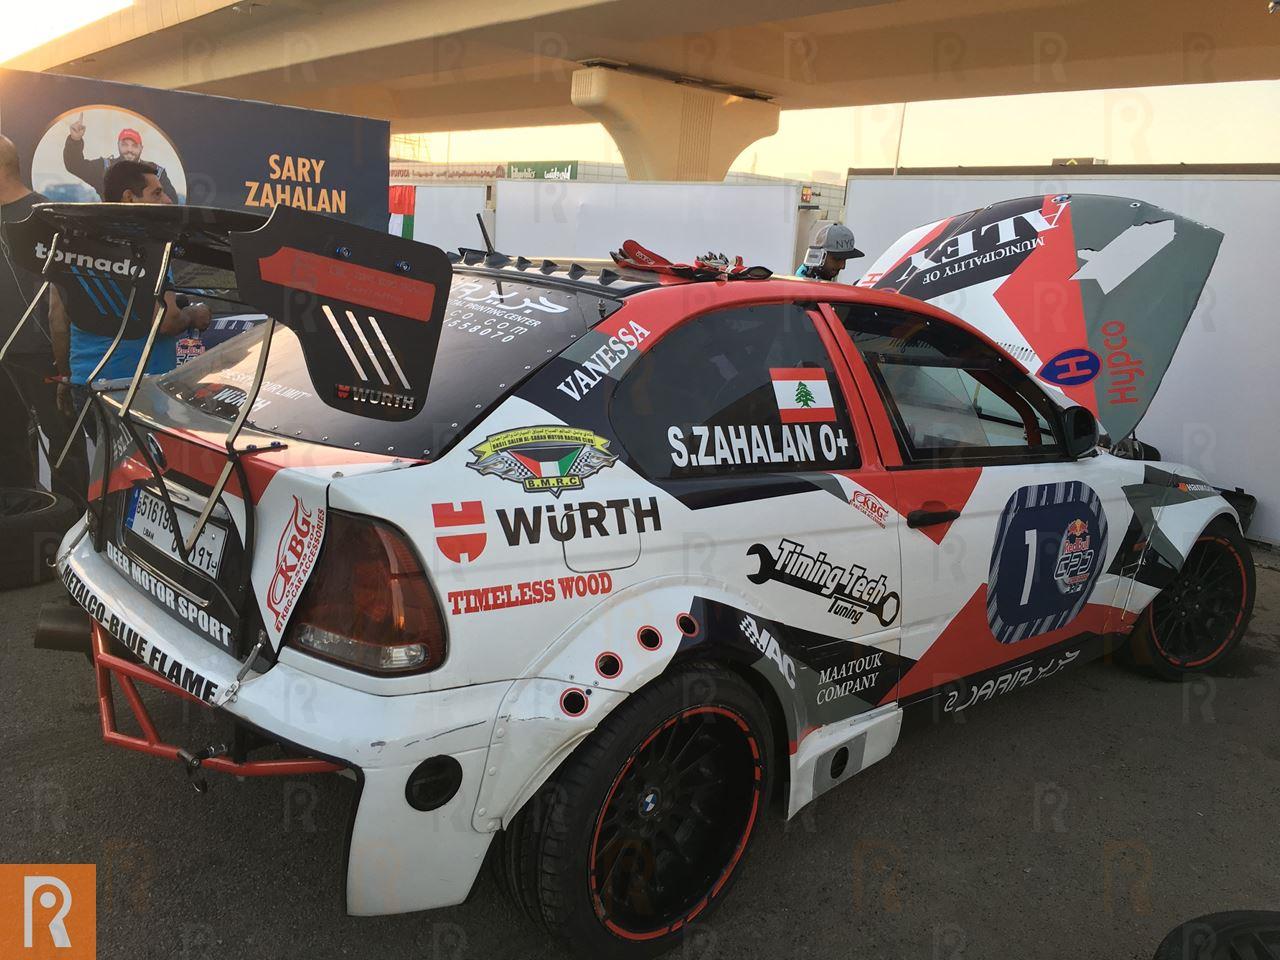 Snapshots from Red Bull Car Park Drift Series Final 2017 in Kuwait